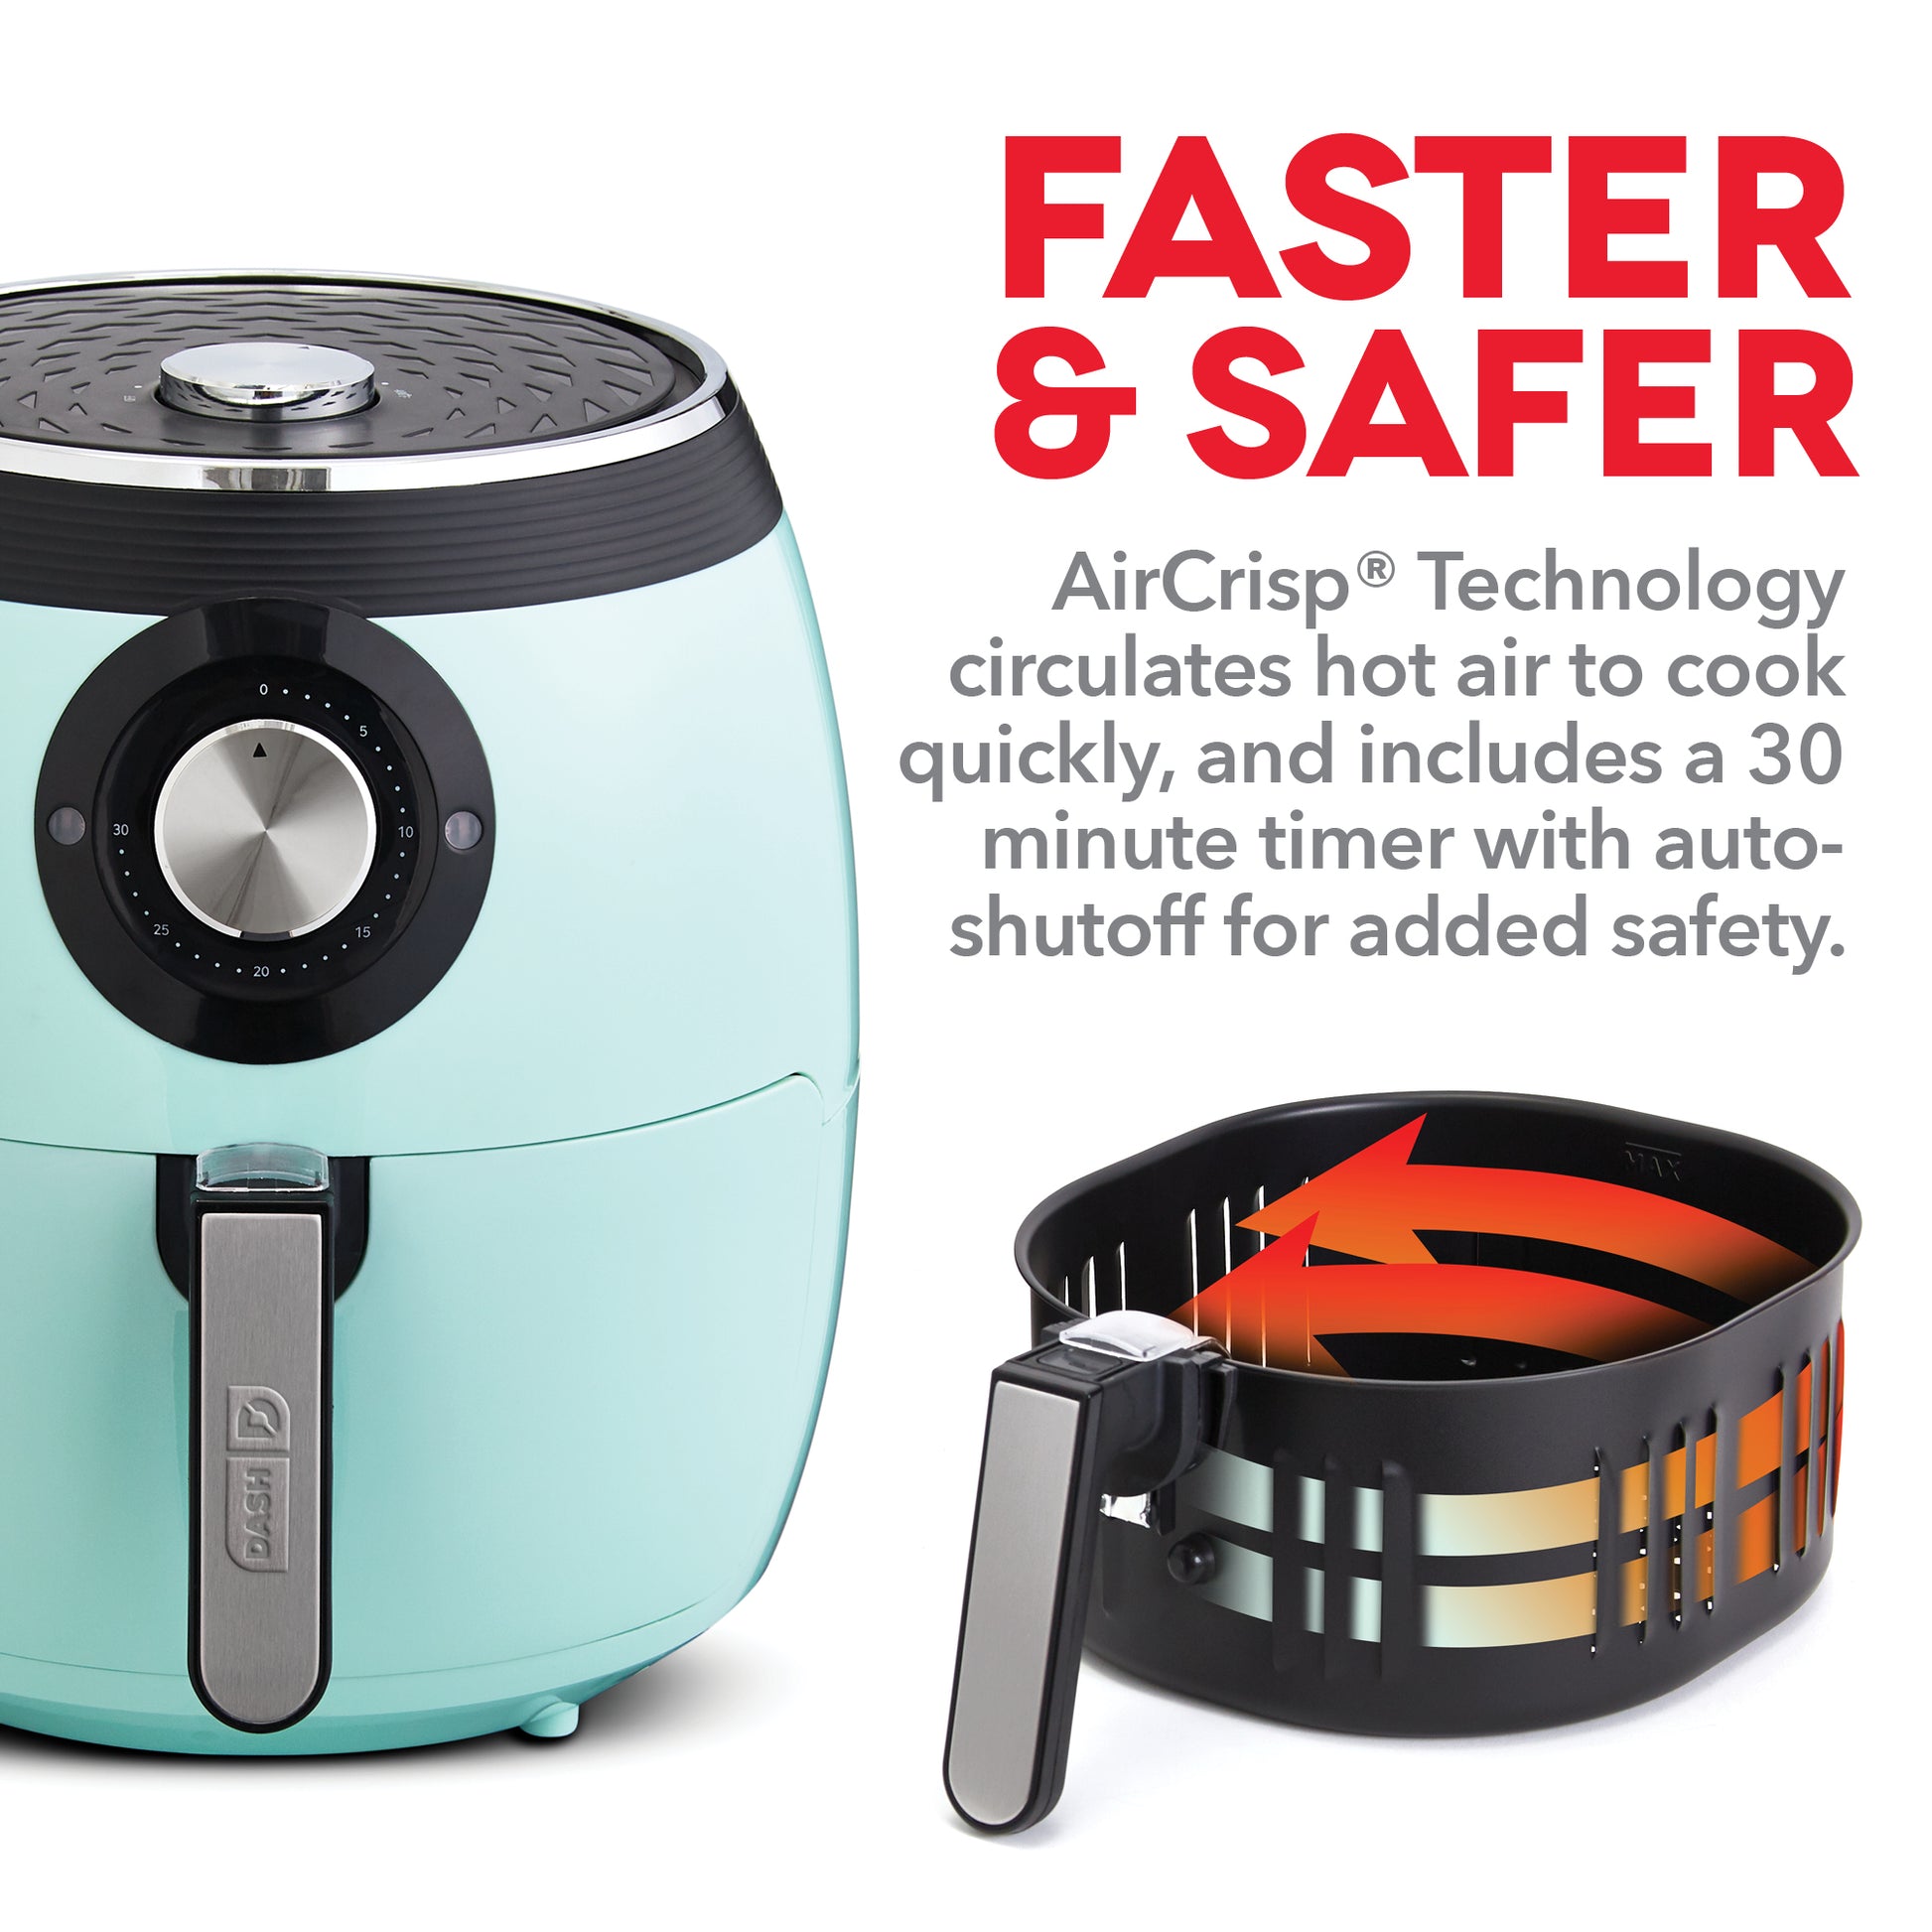 Air fryers: miraculous kitchen must-have, or just a load of hot air?, Food